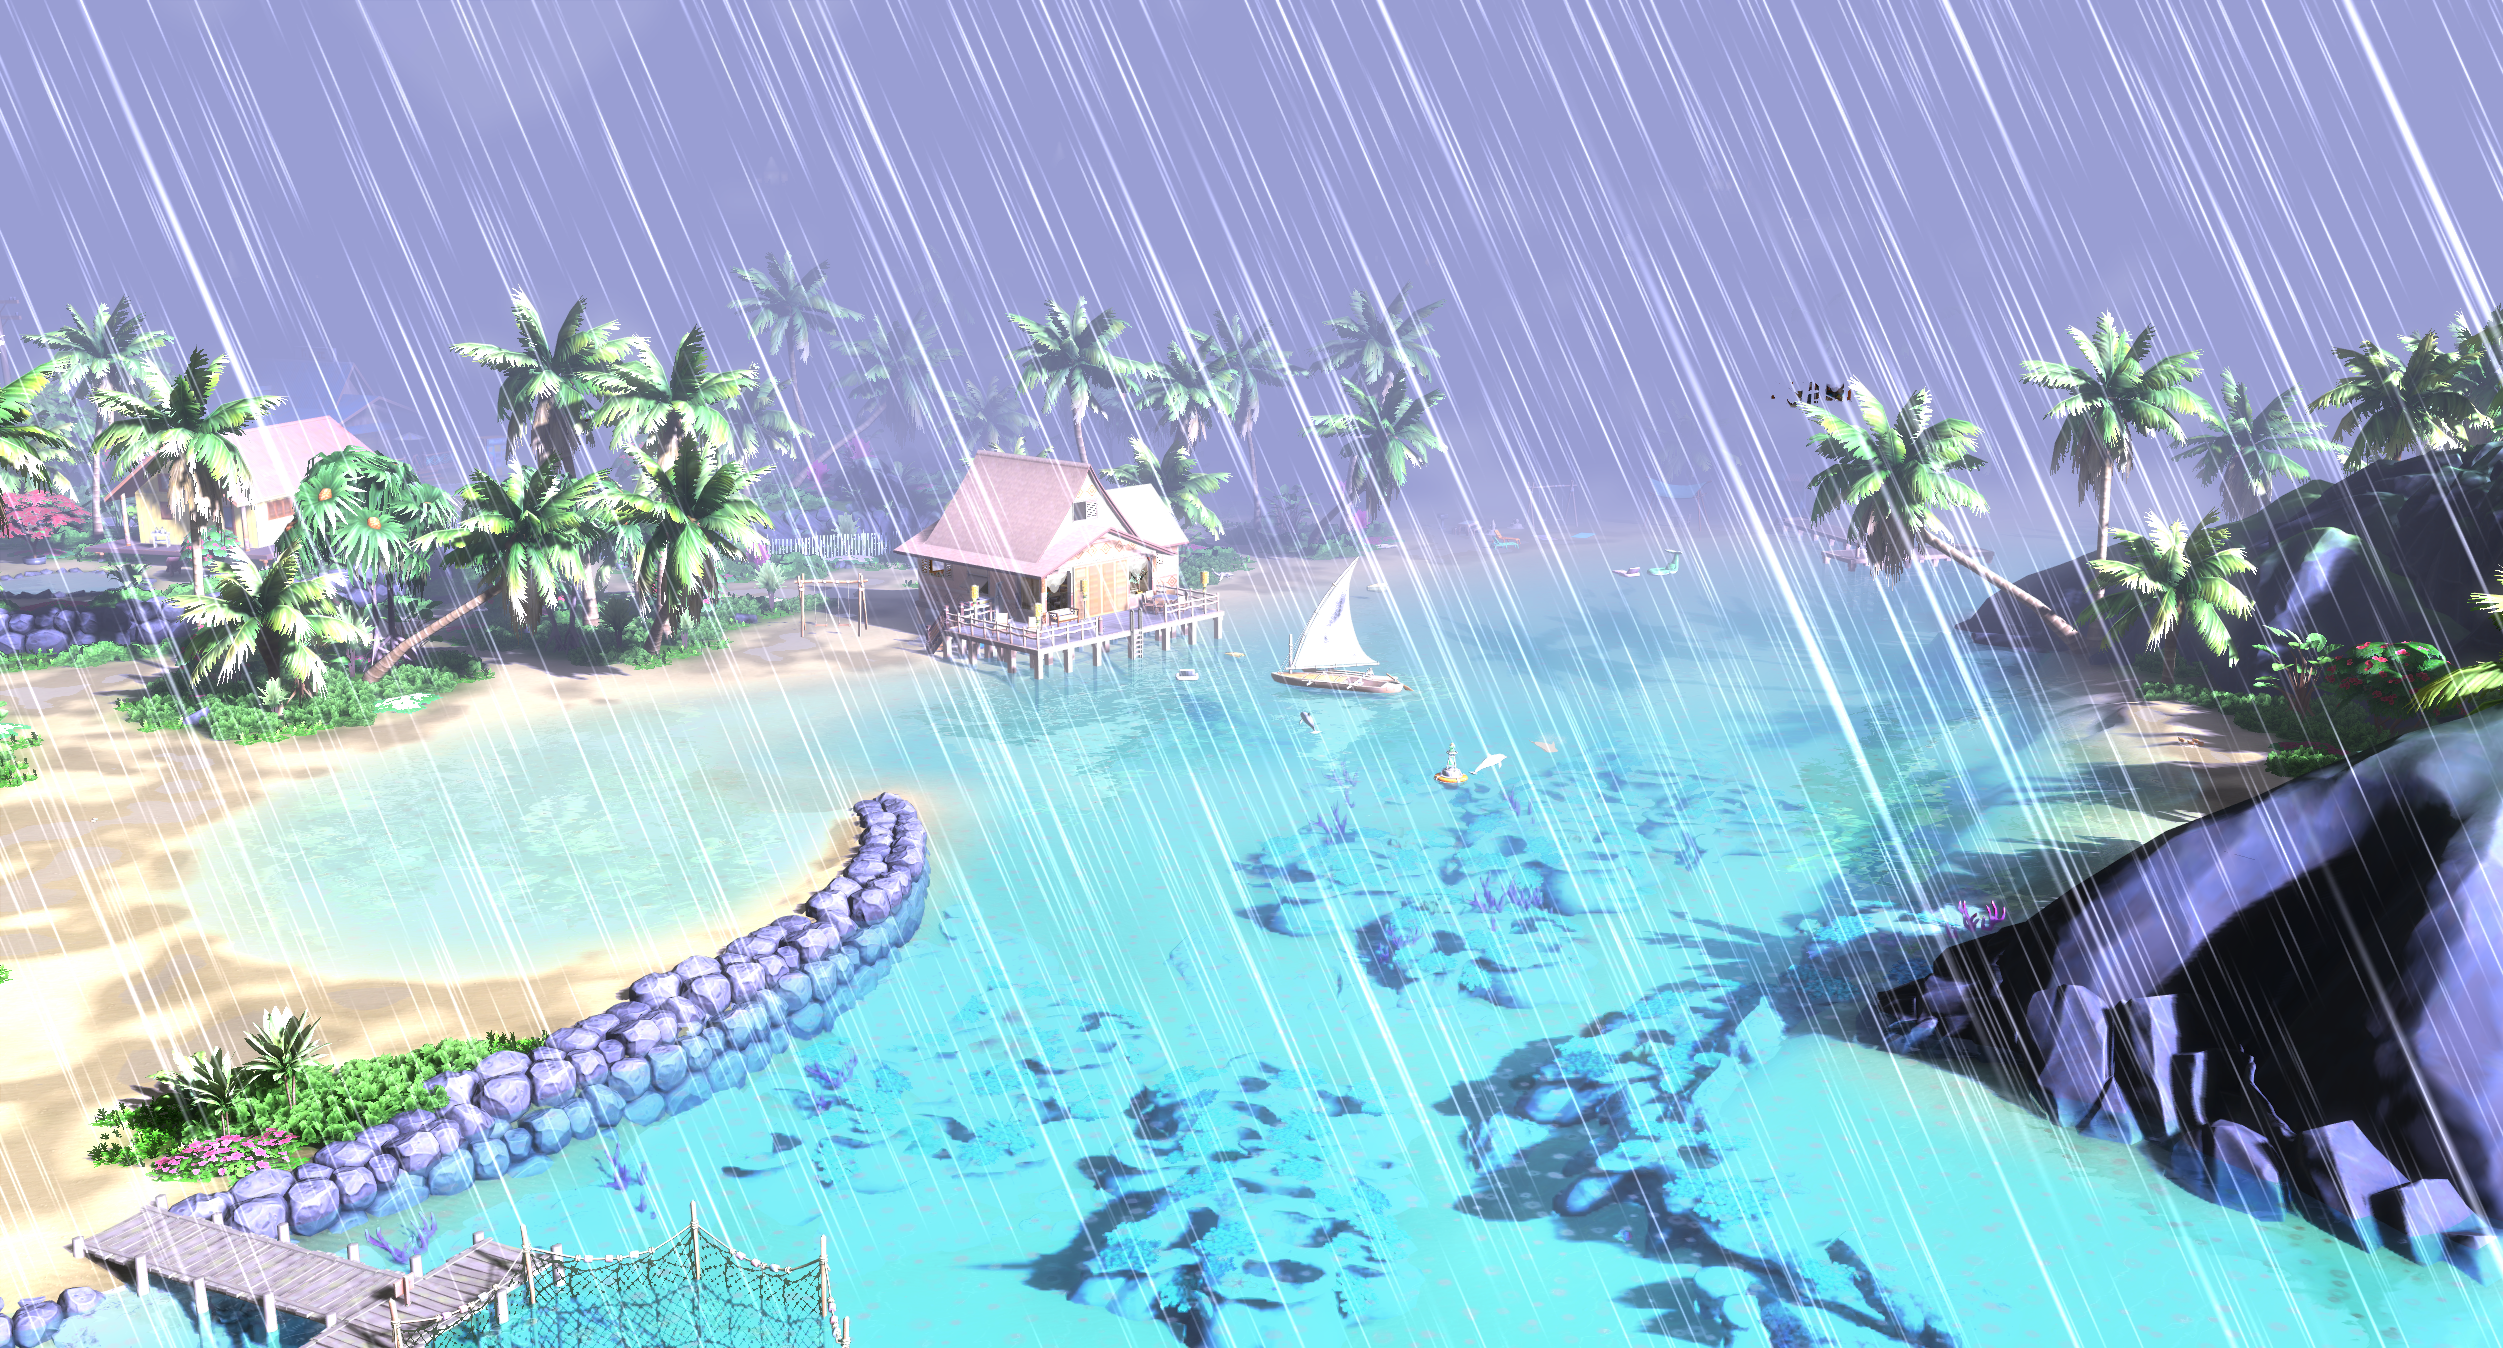 Sulani during a thunderstorm